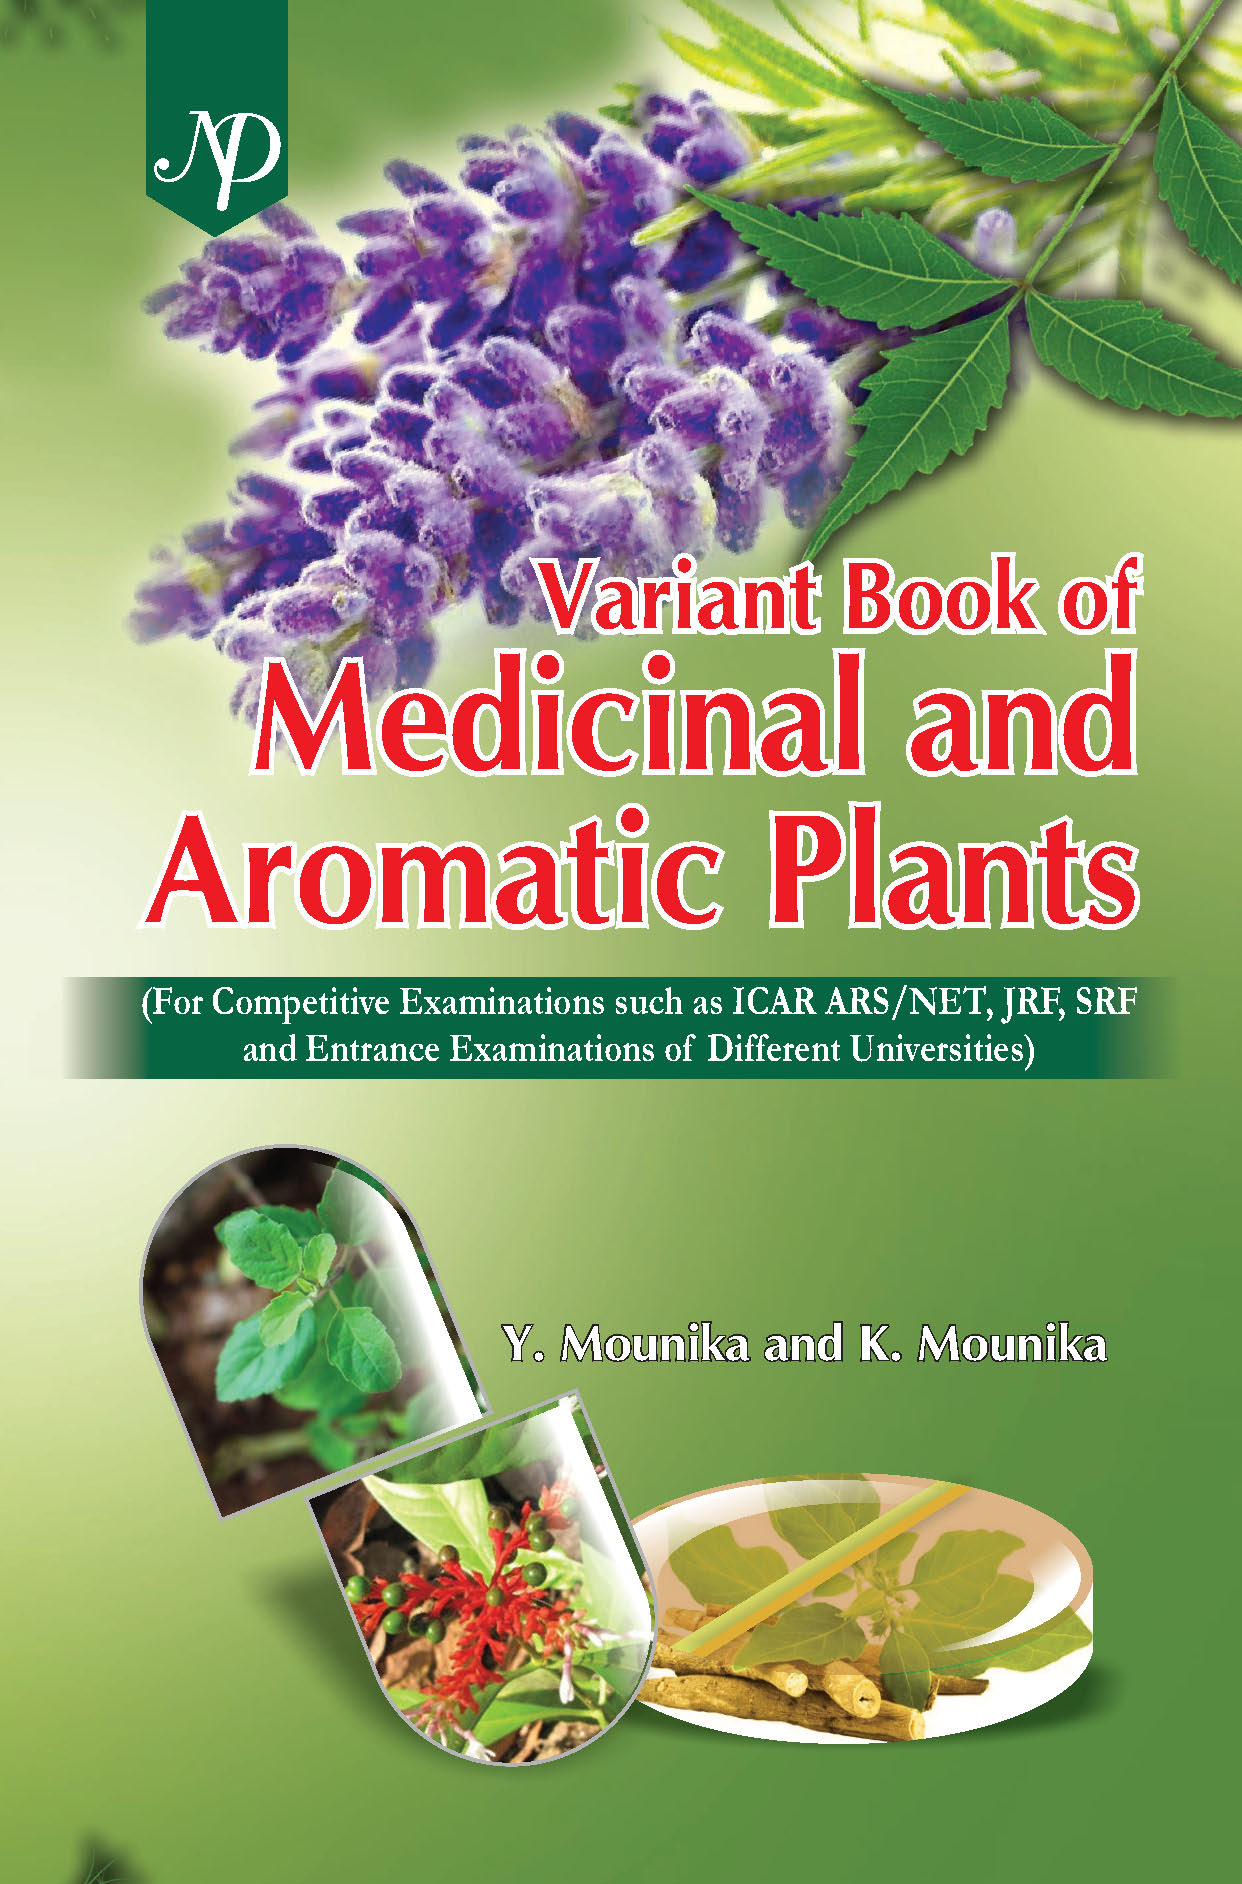 Variant book of Medicinal and aromatic plants Cover.jpg